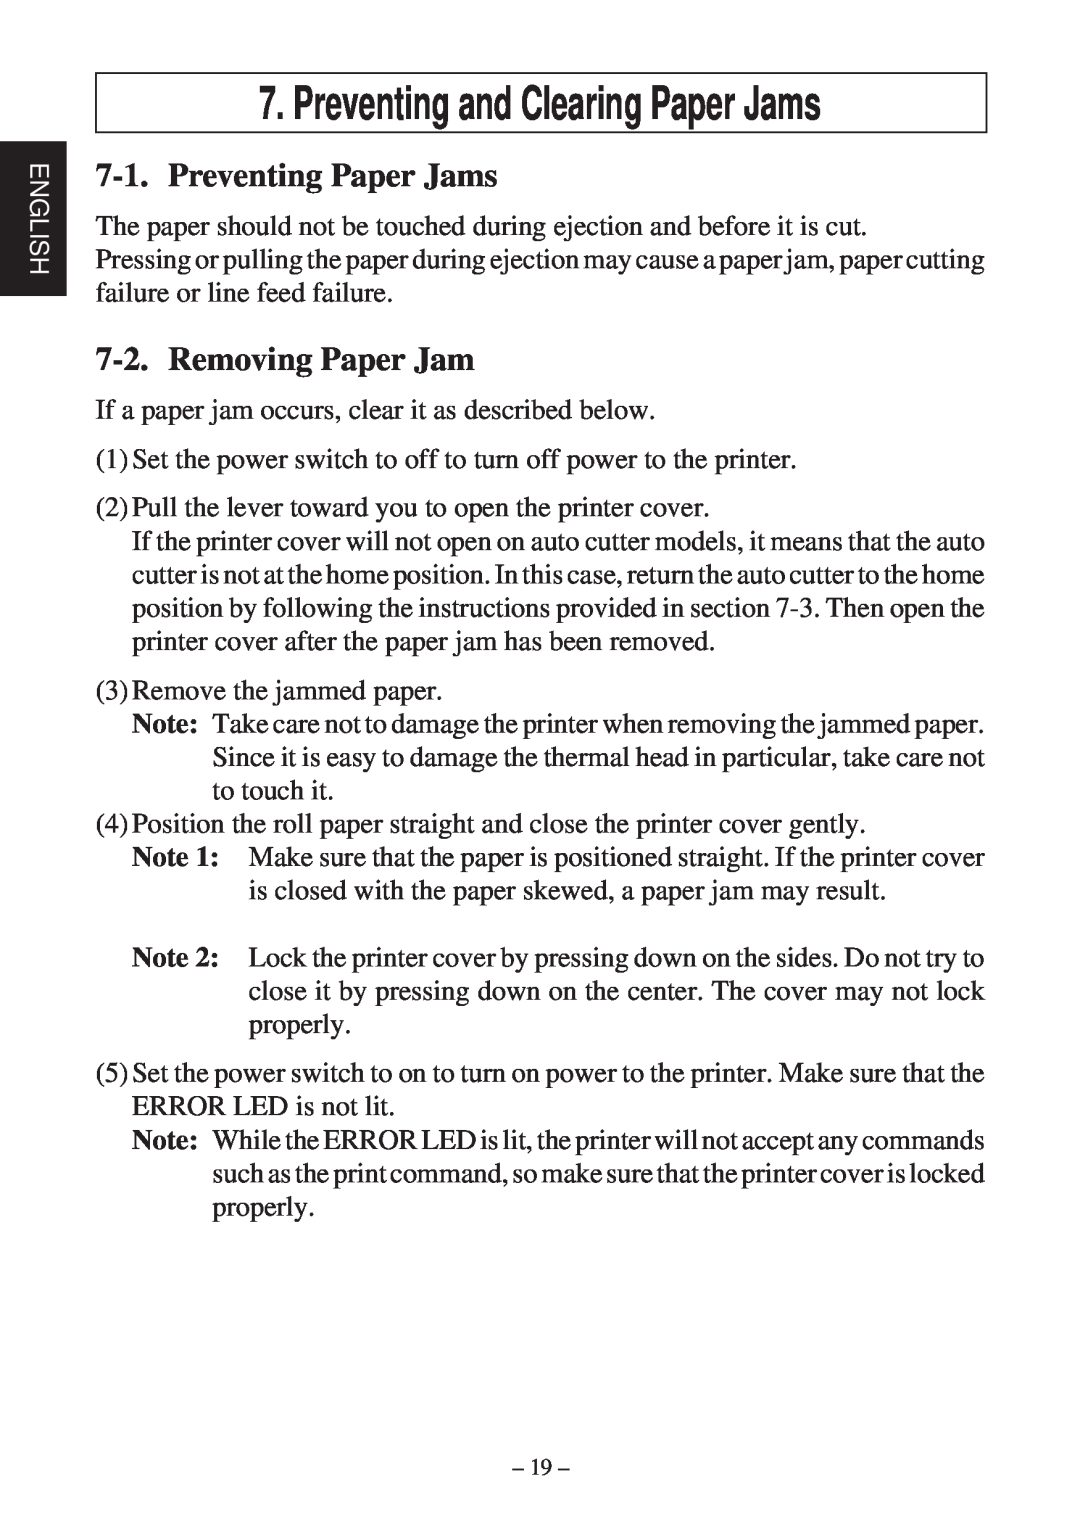 Star Micronics TSP600 user manual Preventing and Clearing Paper Jams, Preventing Paper Jams, Removing Paper Jam 